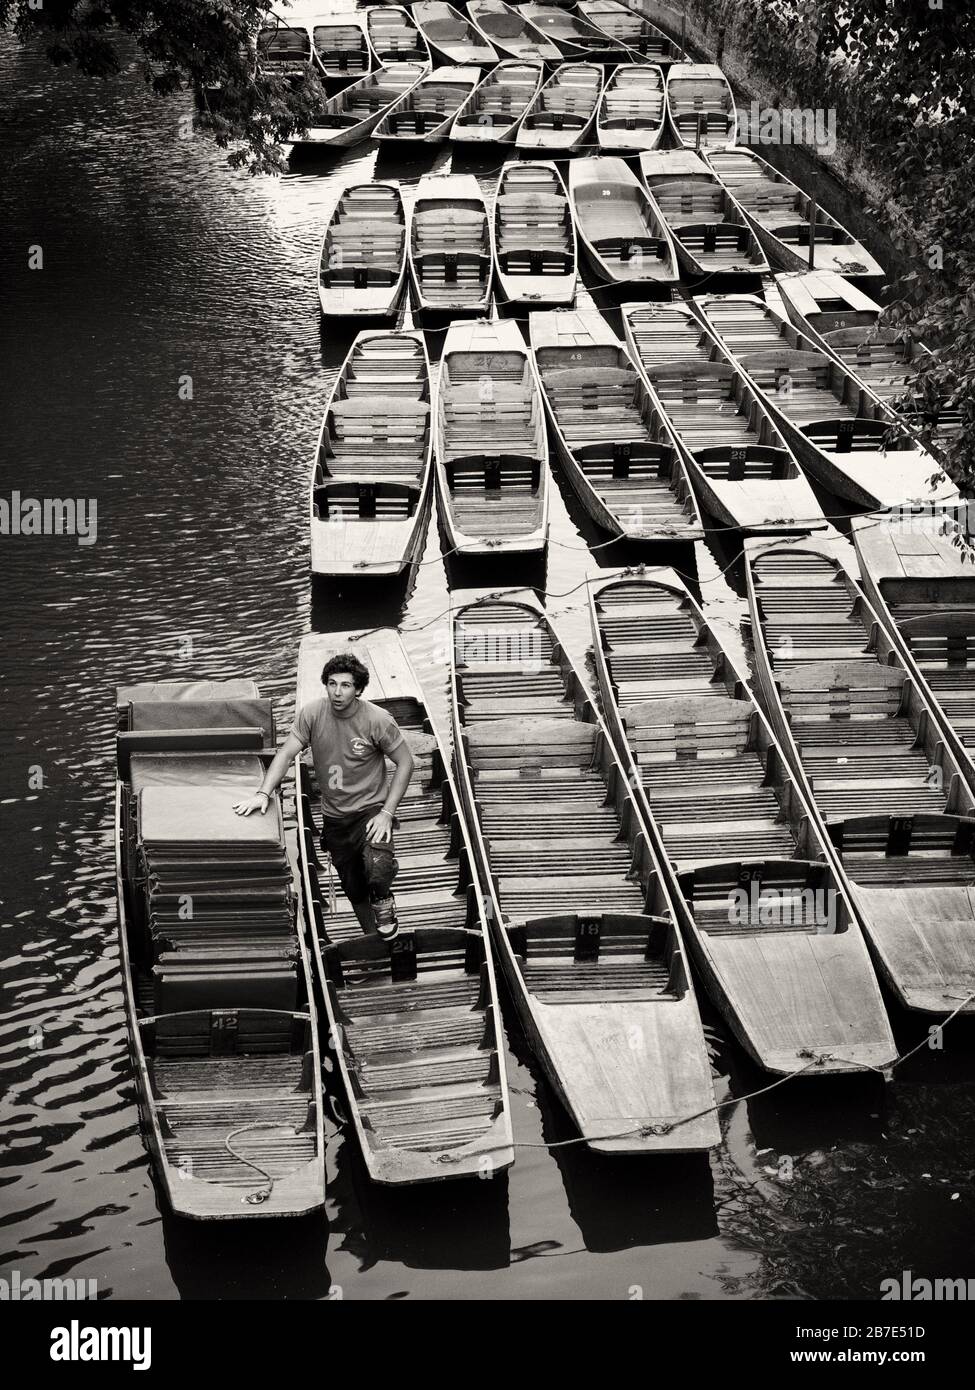 Moored punts on the River Cherwell in Oxford, UK Stock Photo